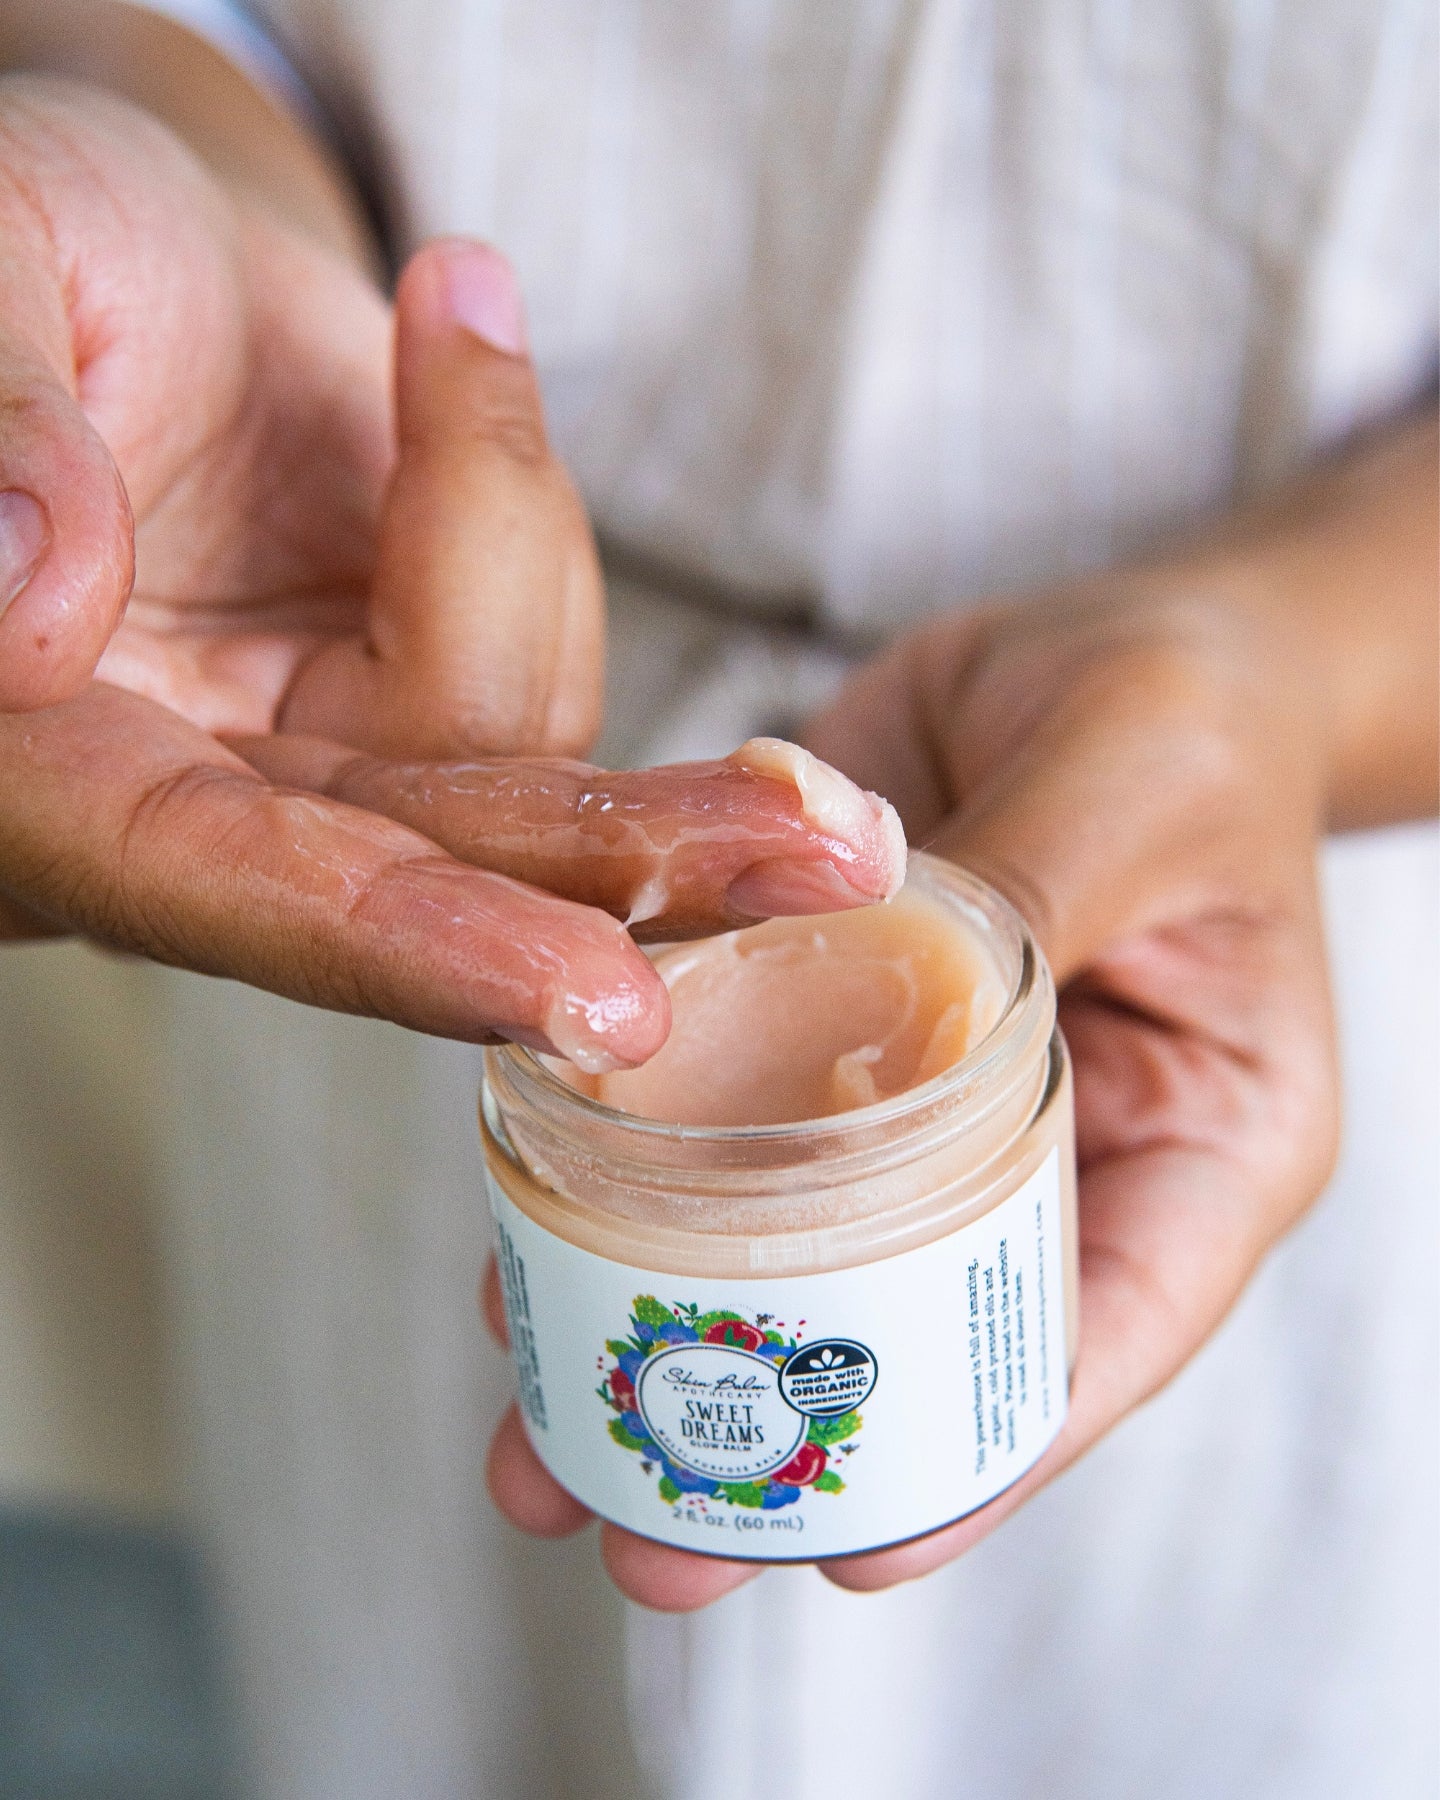 A close-up shot of a woman scooping the Sweet Dreams Glow Balm out of the jar with her fingers.